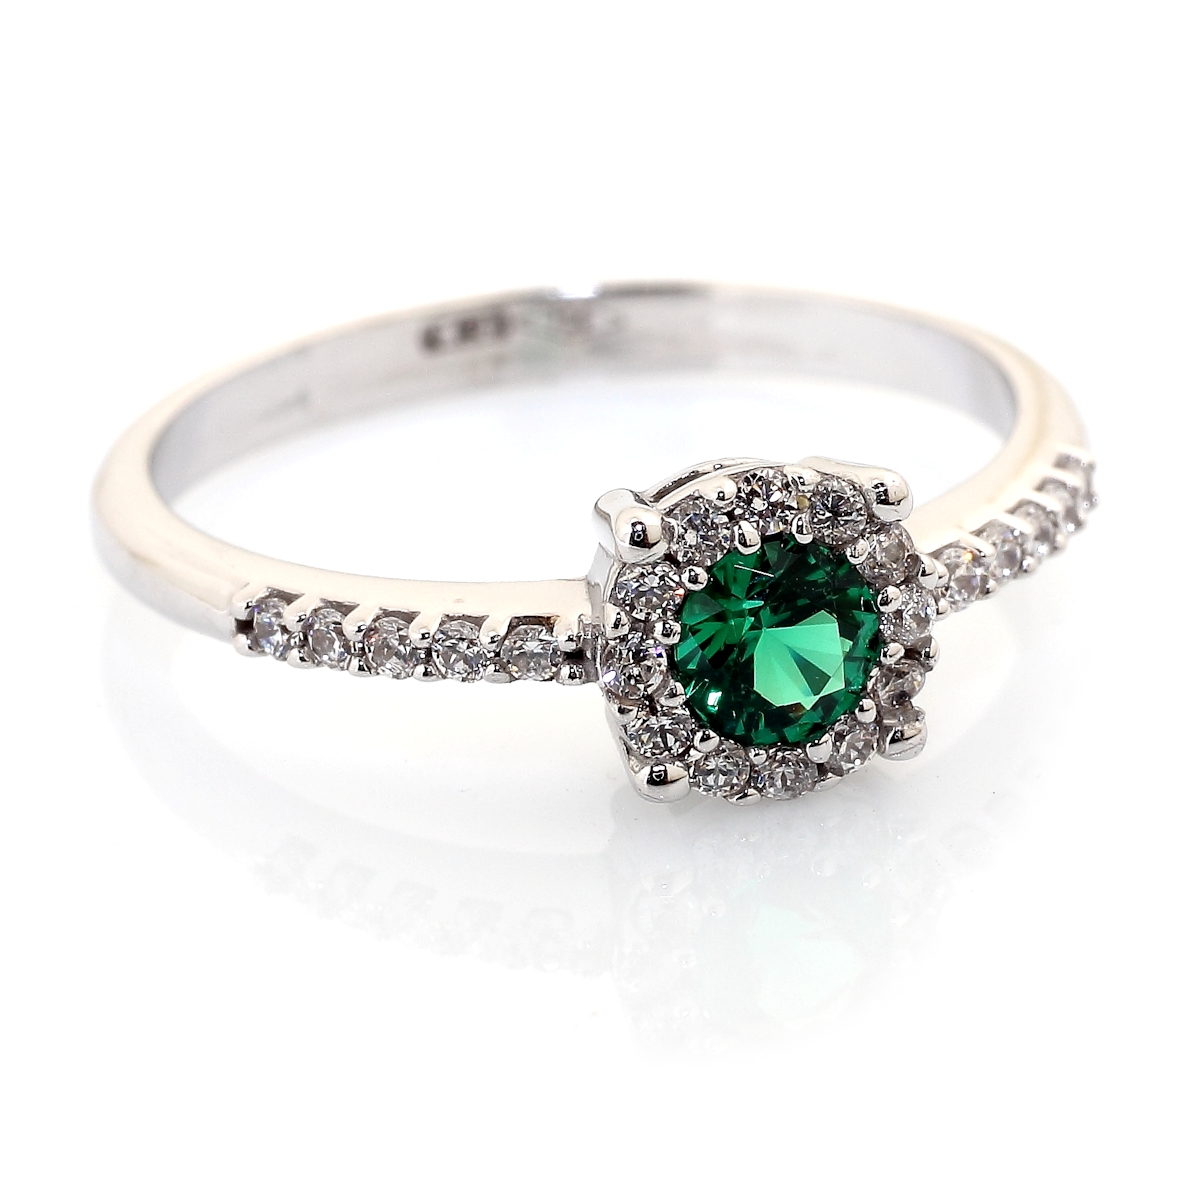 750 Mill. White Gold Ring with Green & White Cubic Zirconia Size P